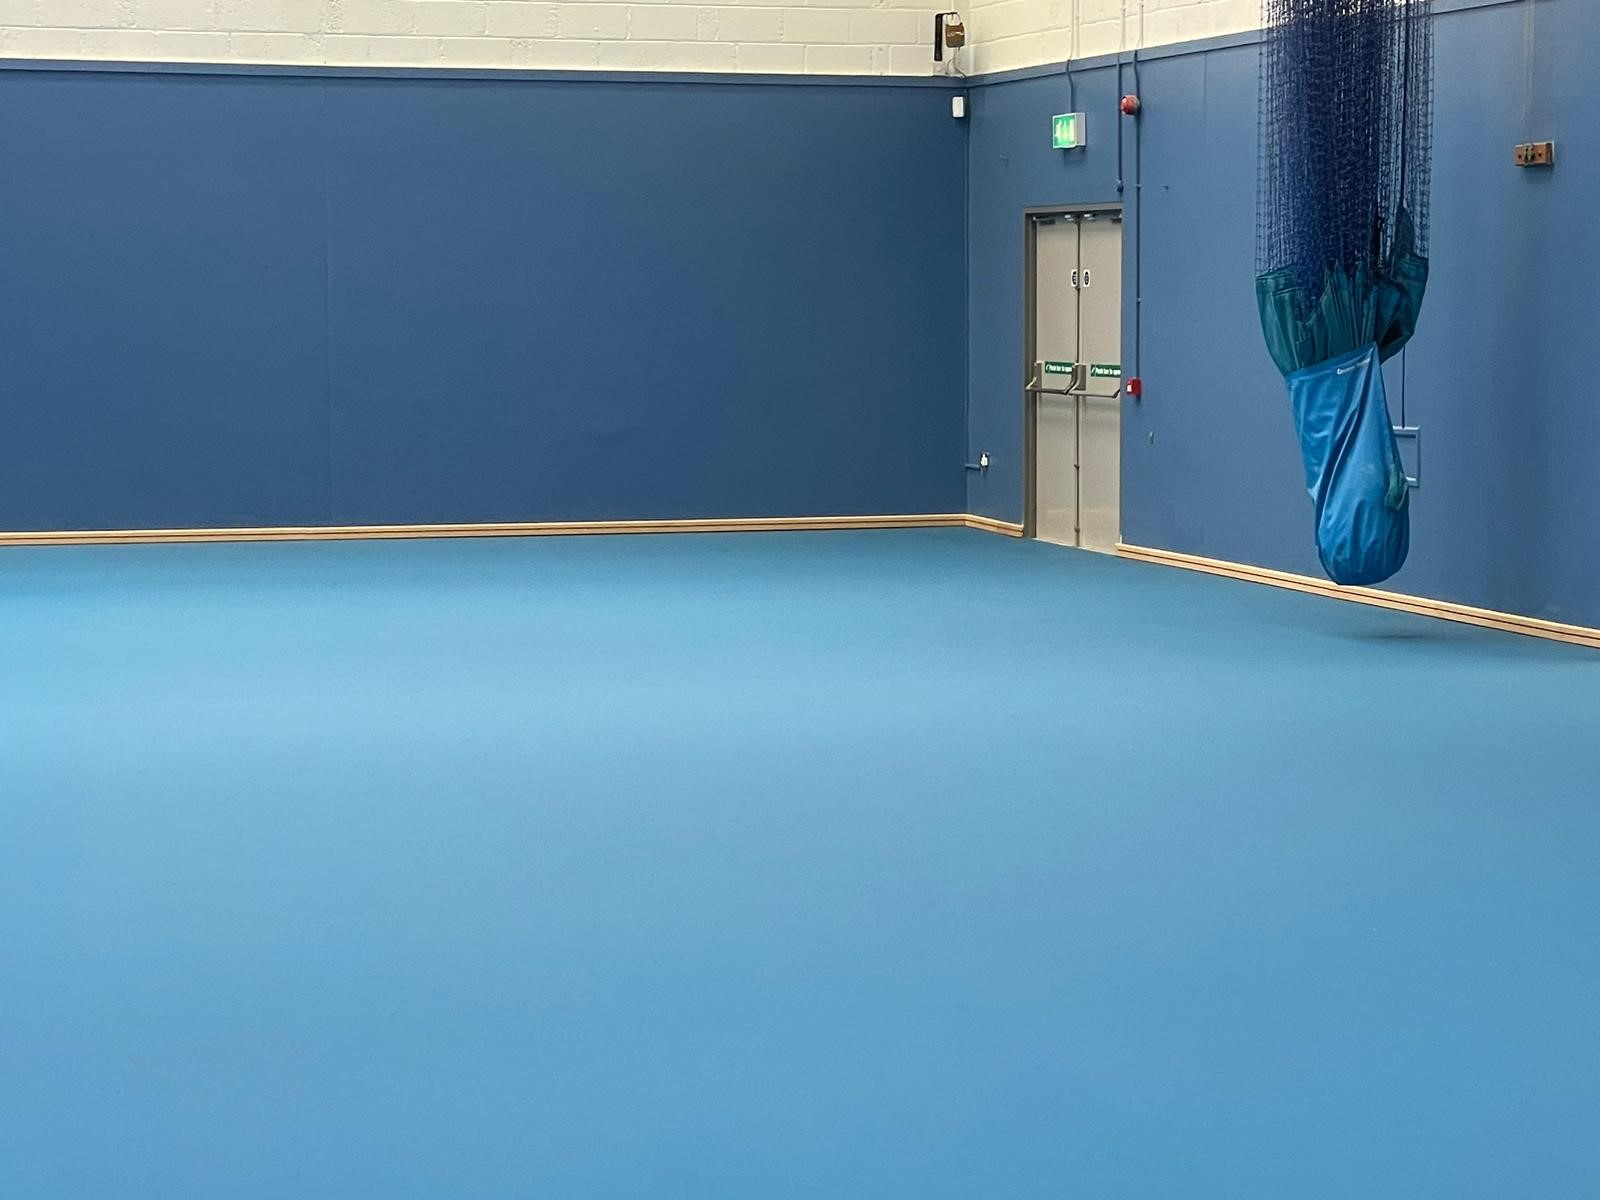 Complete with skirting boards - Pulastic Indoor sports floor overlay -refurbishment service